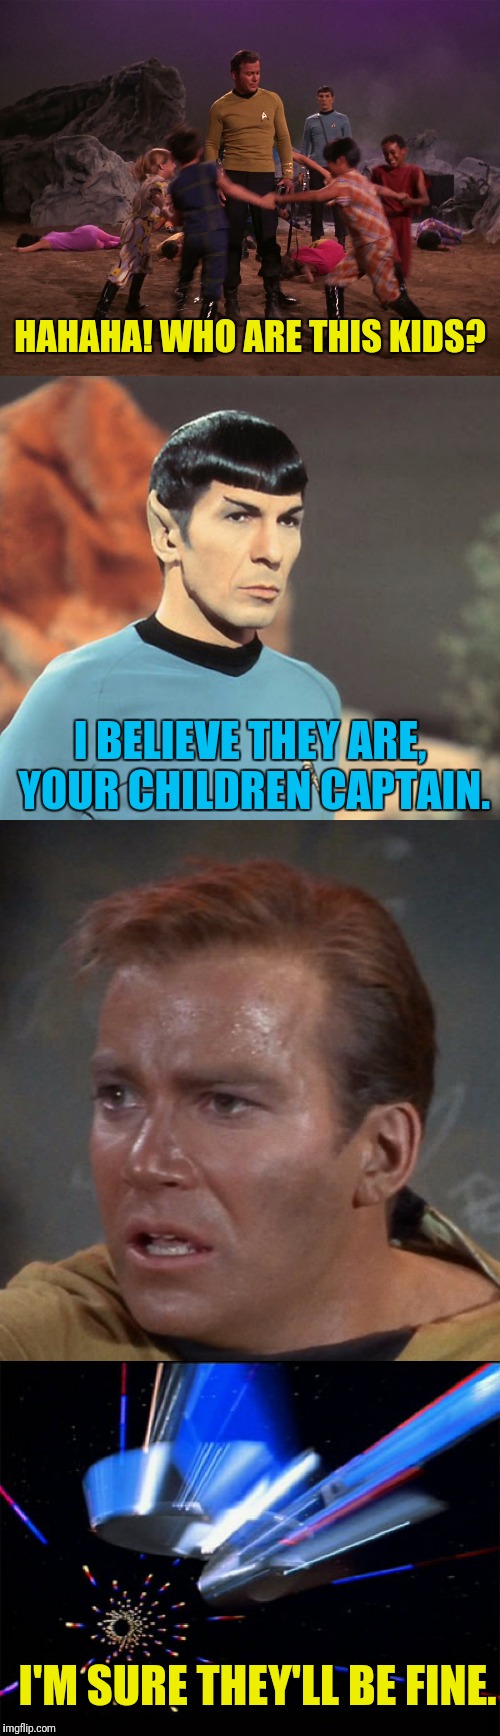 Kirk Is A Hands Off Parent | HAHAHA! WHO ARE THIS KIDS? I BELIEVE THEY ARE, YOUR CHILDREN CAPTAIN. I'M SURE THEY'LL BE FINE. | image tagged in star trek,captain kirk,spock,kirk,mr spock | made w/ Imgflip meme maker